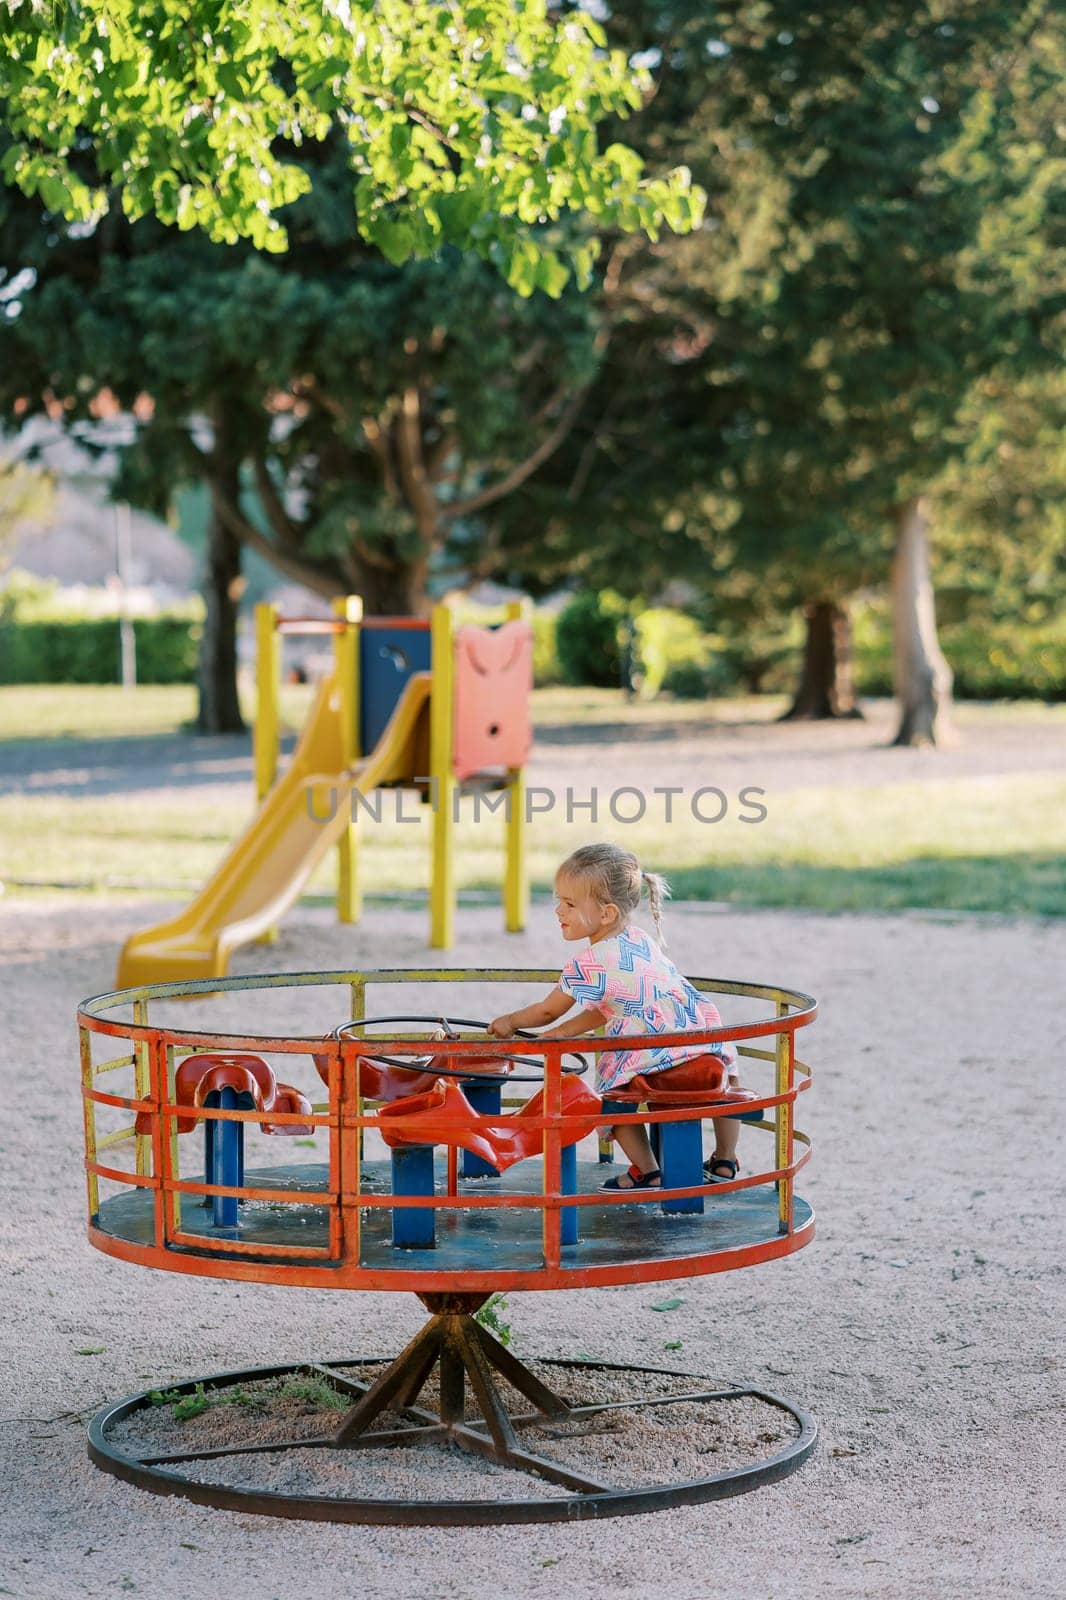 Little girl sitting on a carousel holding the steering wheel in the playground by Nadtochiy